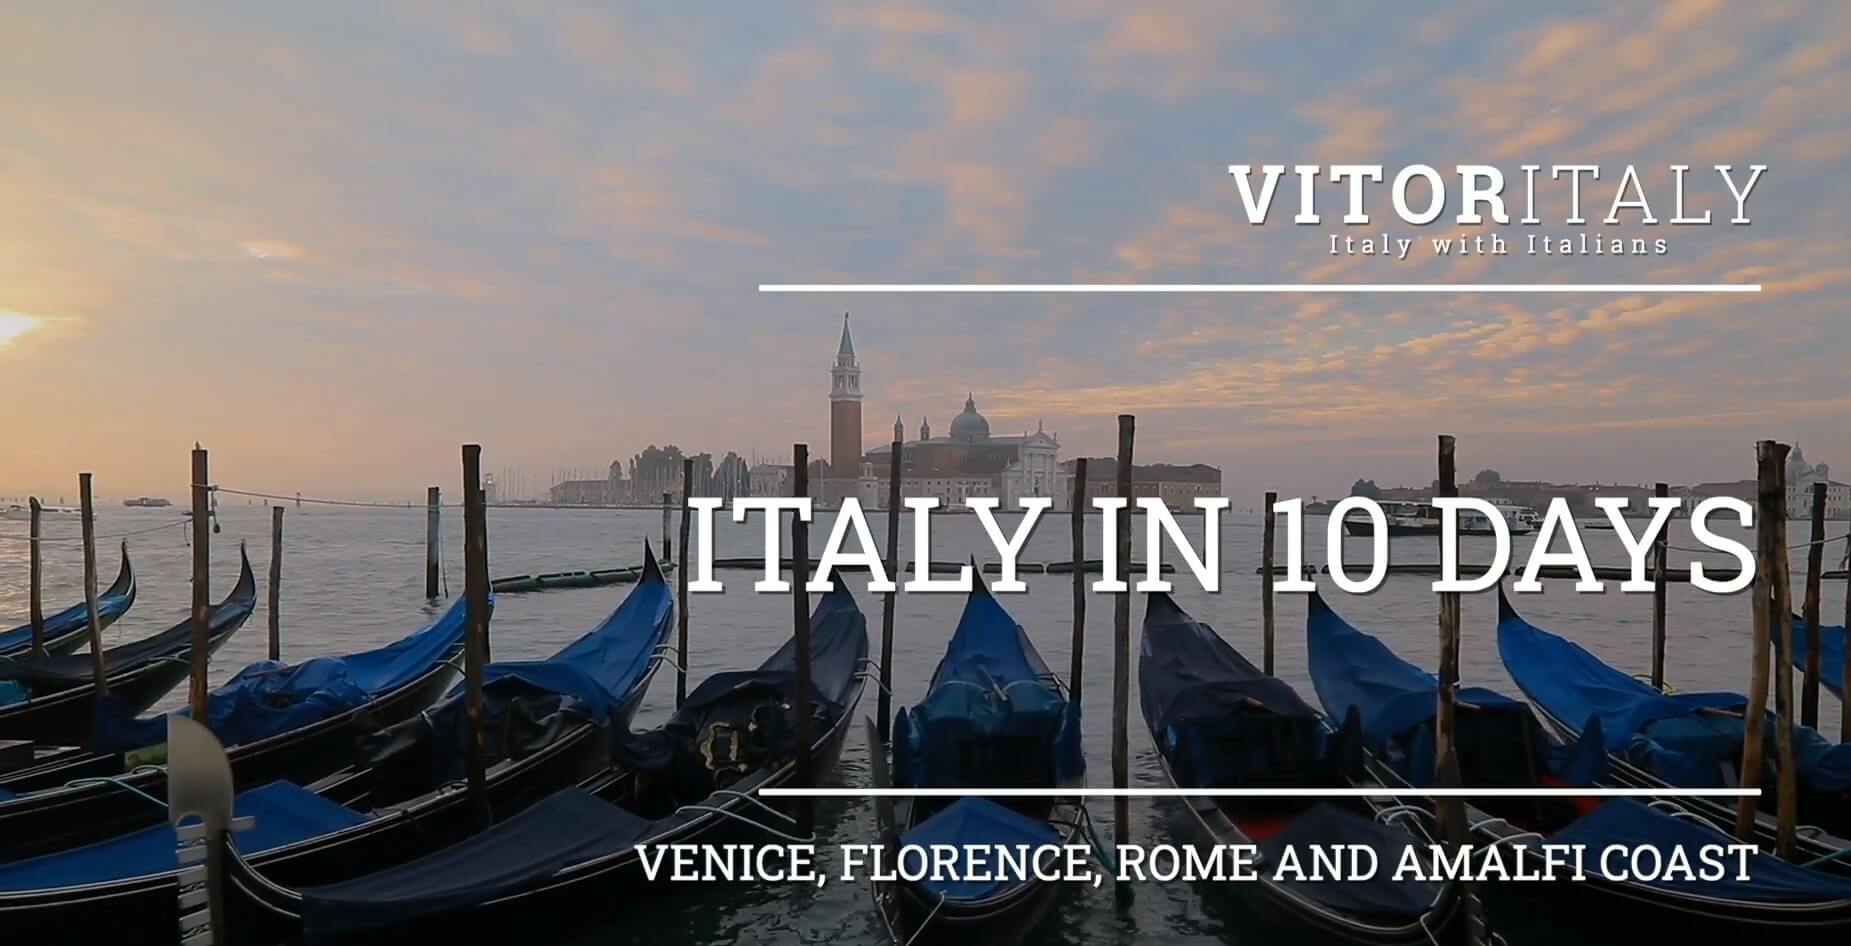 ITALY IN 10 DAYS - Venice, Florence, Rome and Amalfi Coast